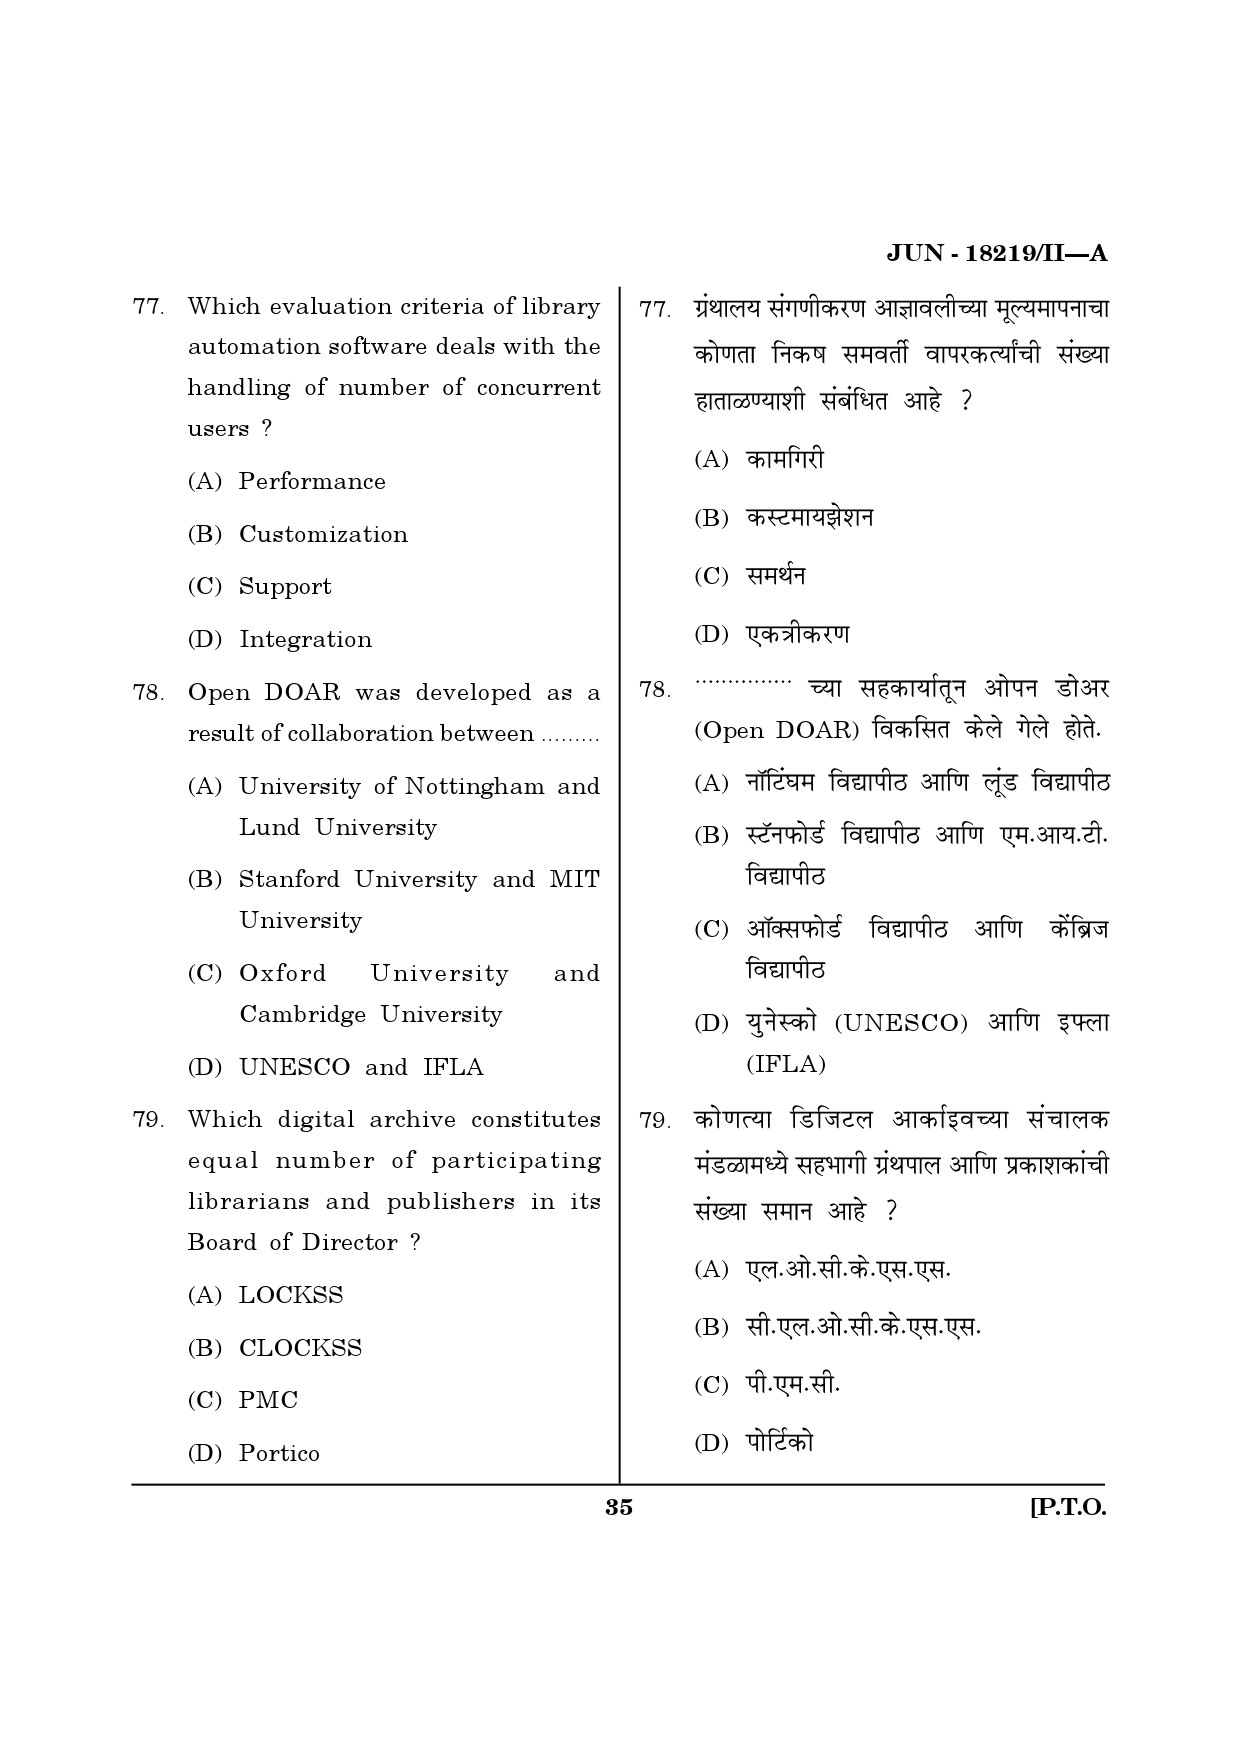 Maharashtra SET Library Information Science Question Paper II June 2019 34